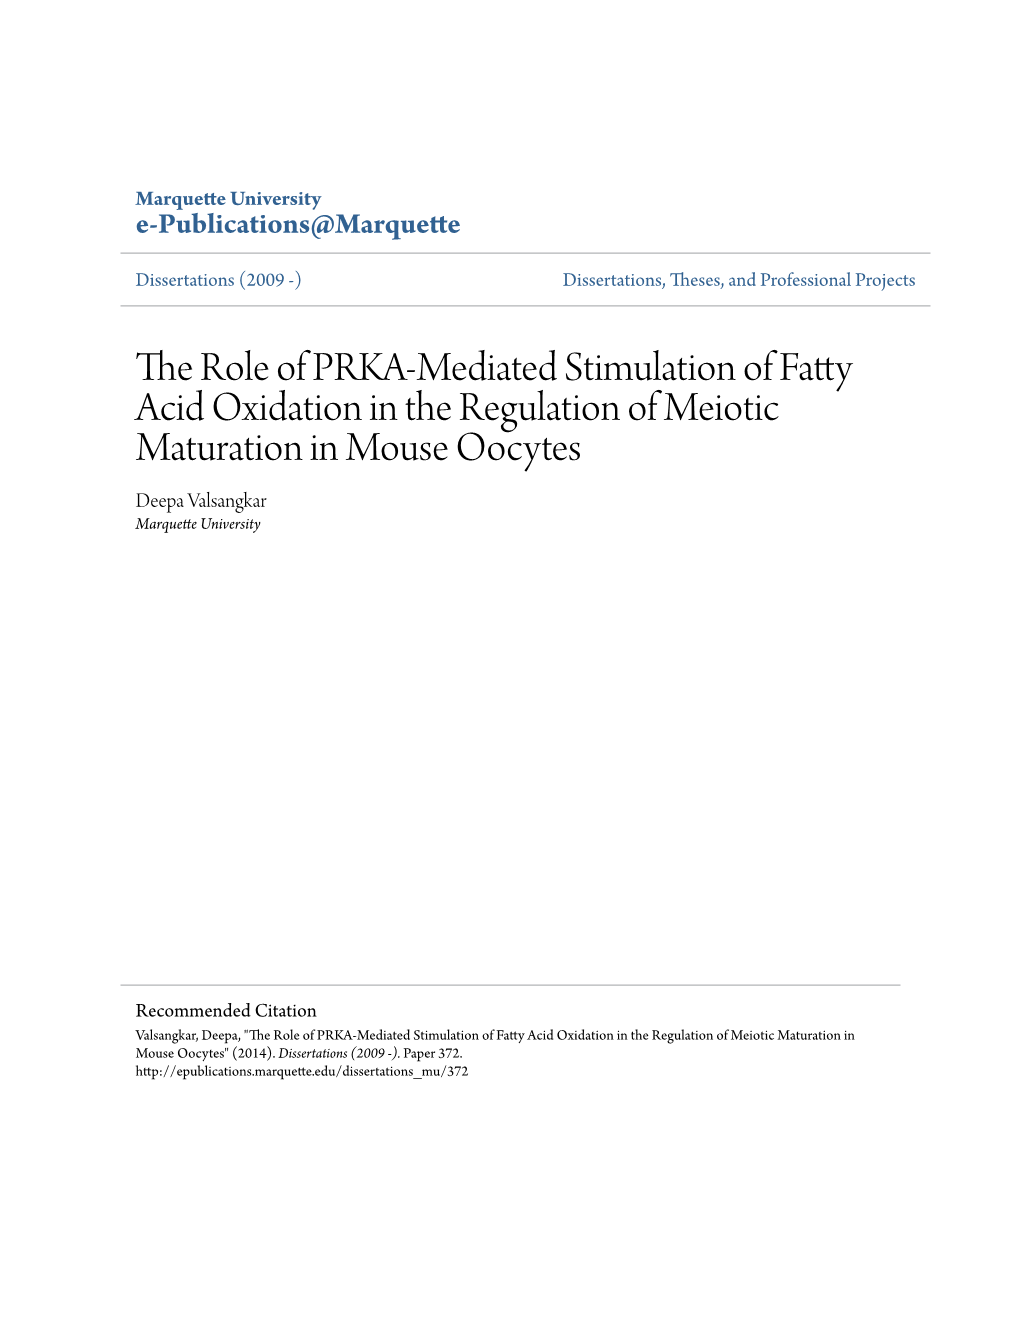 The Role of PRKA-Mediated Stimulation of Fatty Acid Oxidation in the Regulation of Meiotic Maturation in Mouse Oocytes Deepa Valsangkar Marquette University